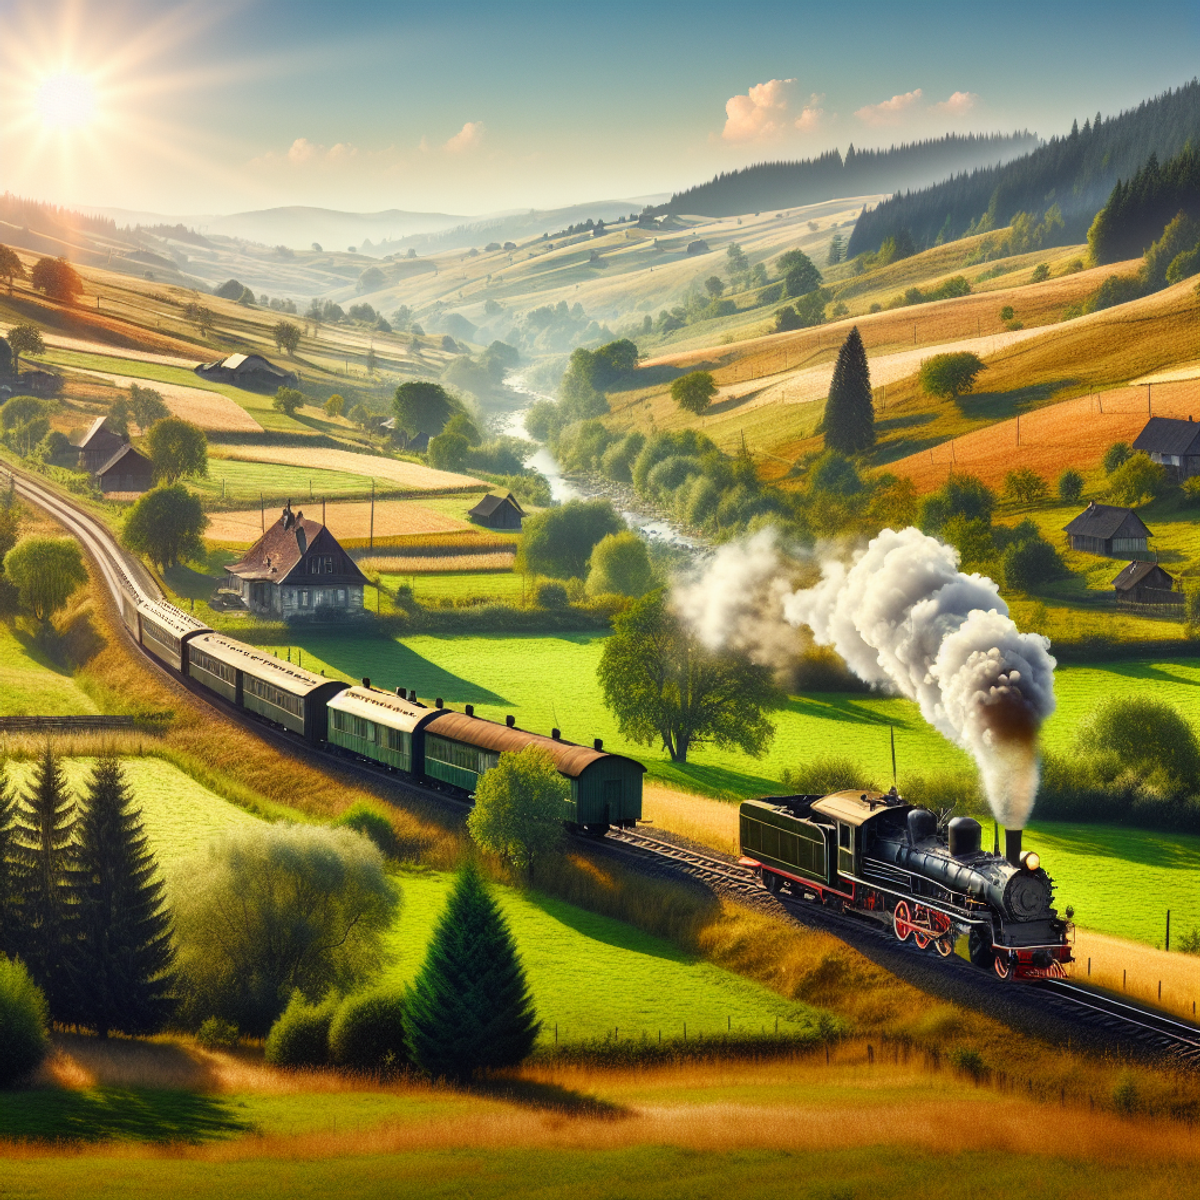 Vintage steam train traveling through picturesque countryside on a sunny day.